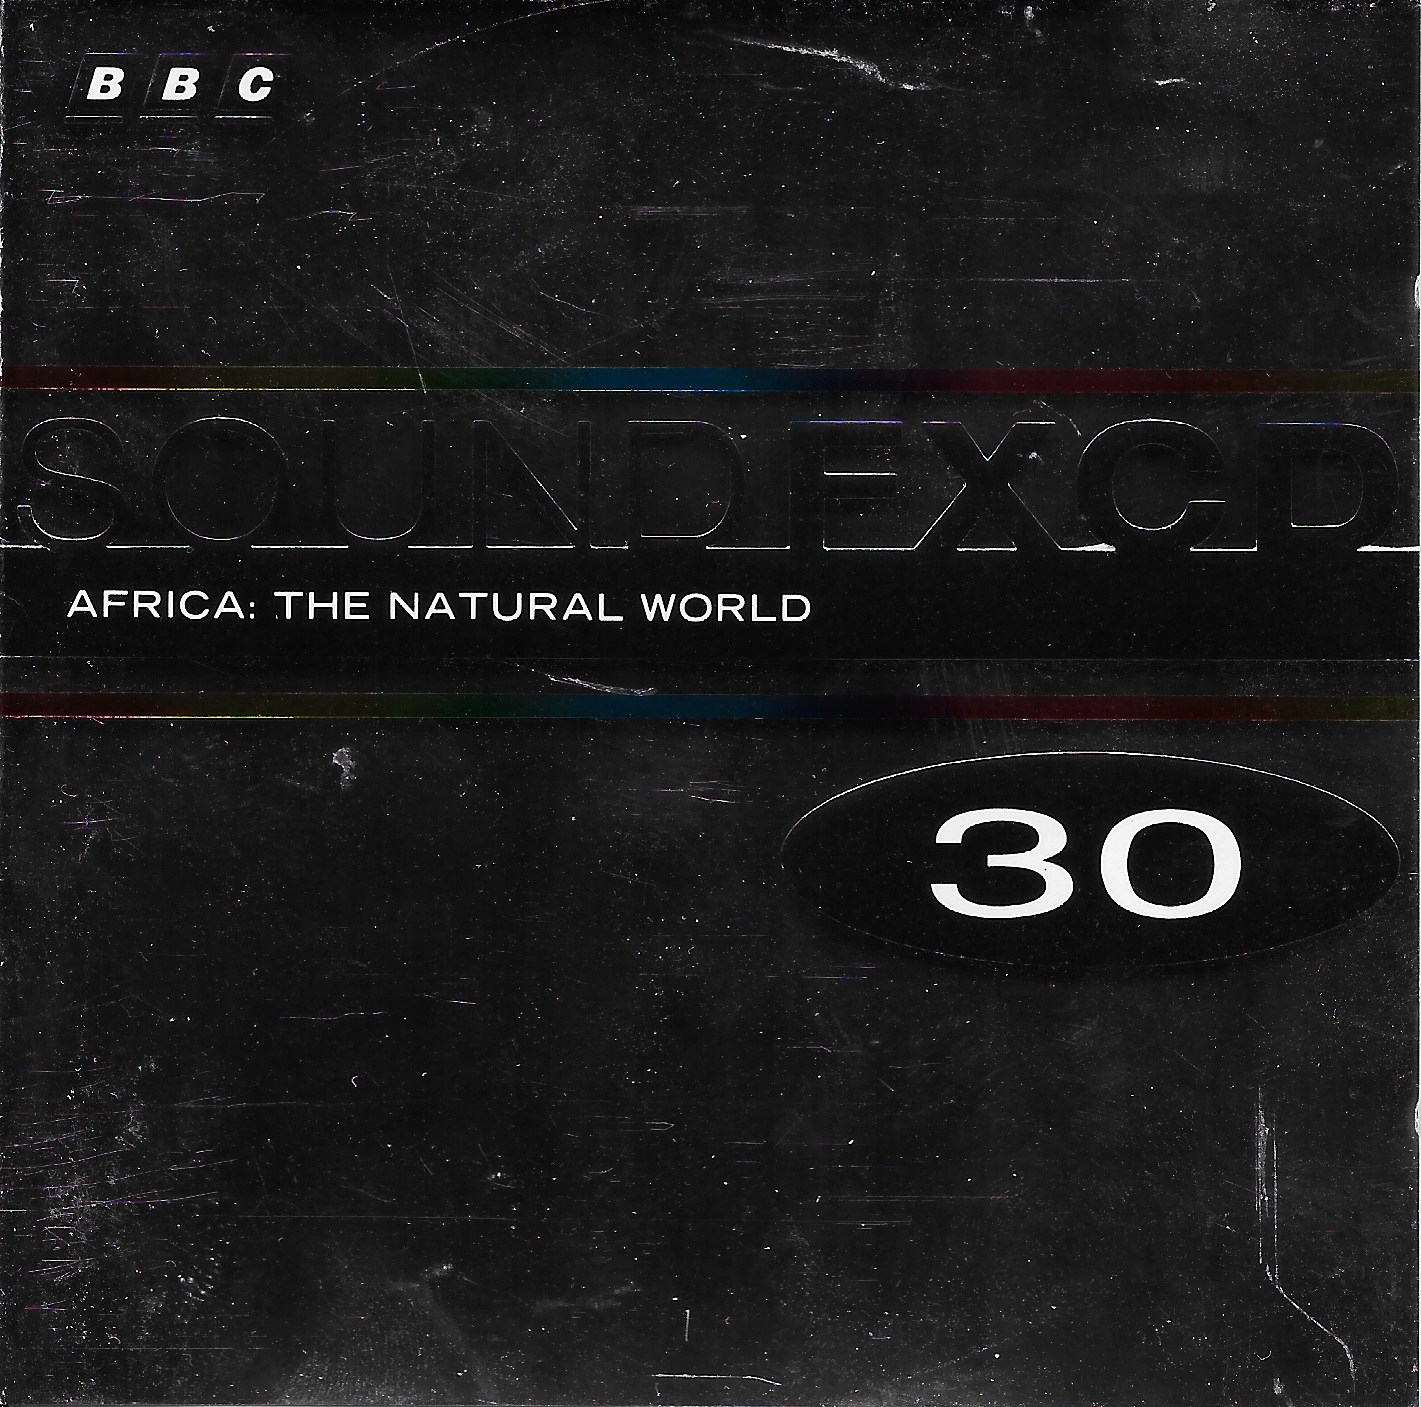 Picture of BBCCD SFX030 Africa: The natural world by artist Various from the BBC cds - Records and Tapes library